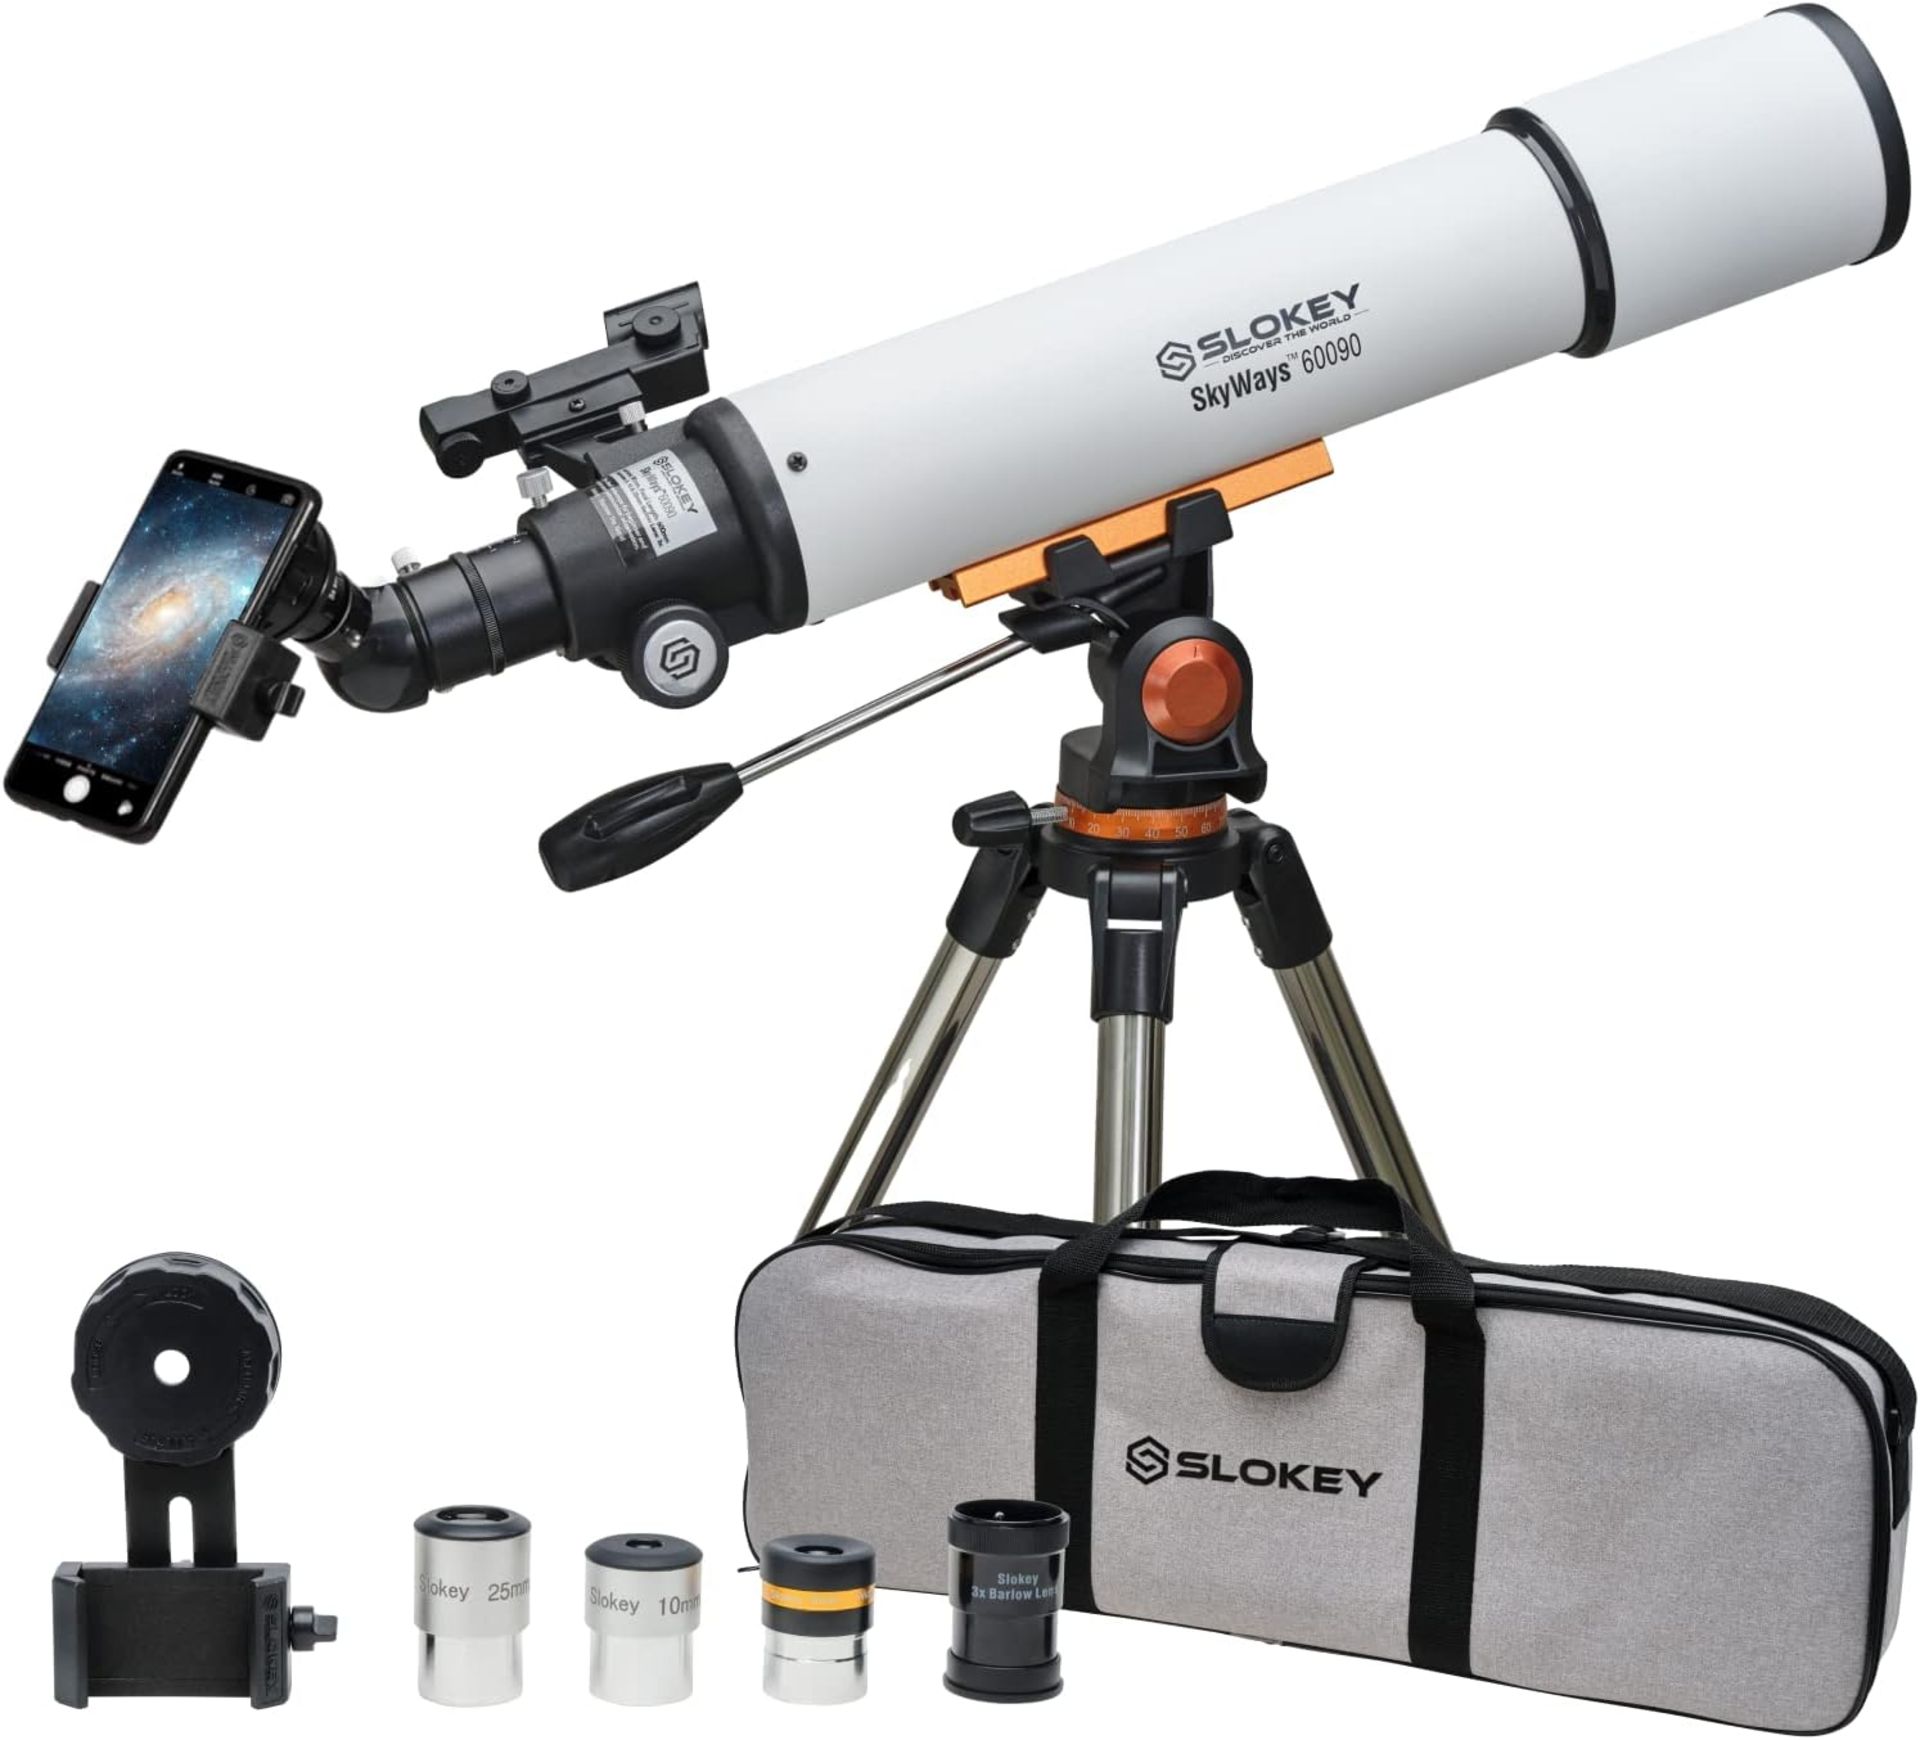 Slokey 60090 SKYWAYS TELESCOPE FOR ASTRONOMY WITH ACCESSORIES (NEW) - AMAZON PRICE Â£299.99! - Image 2 of 9